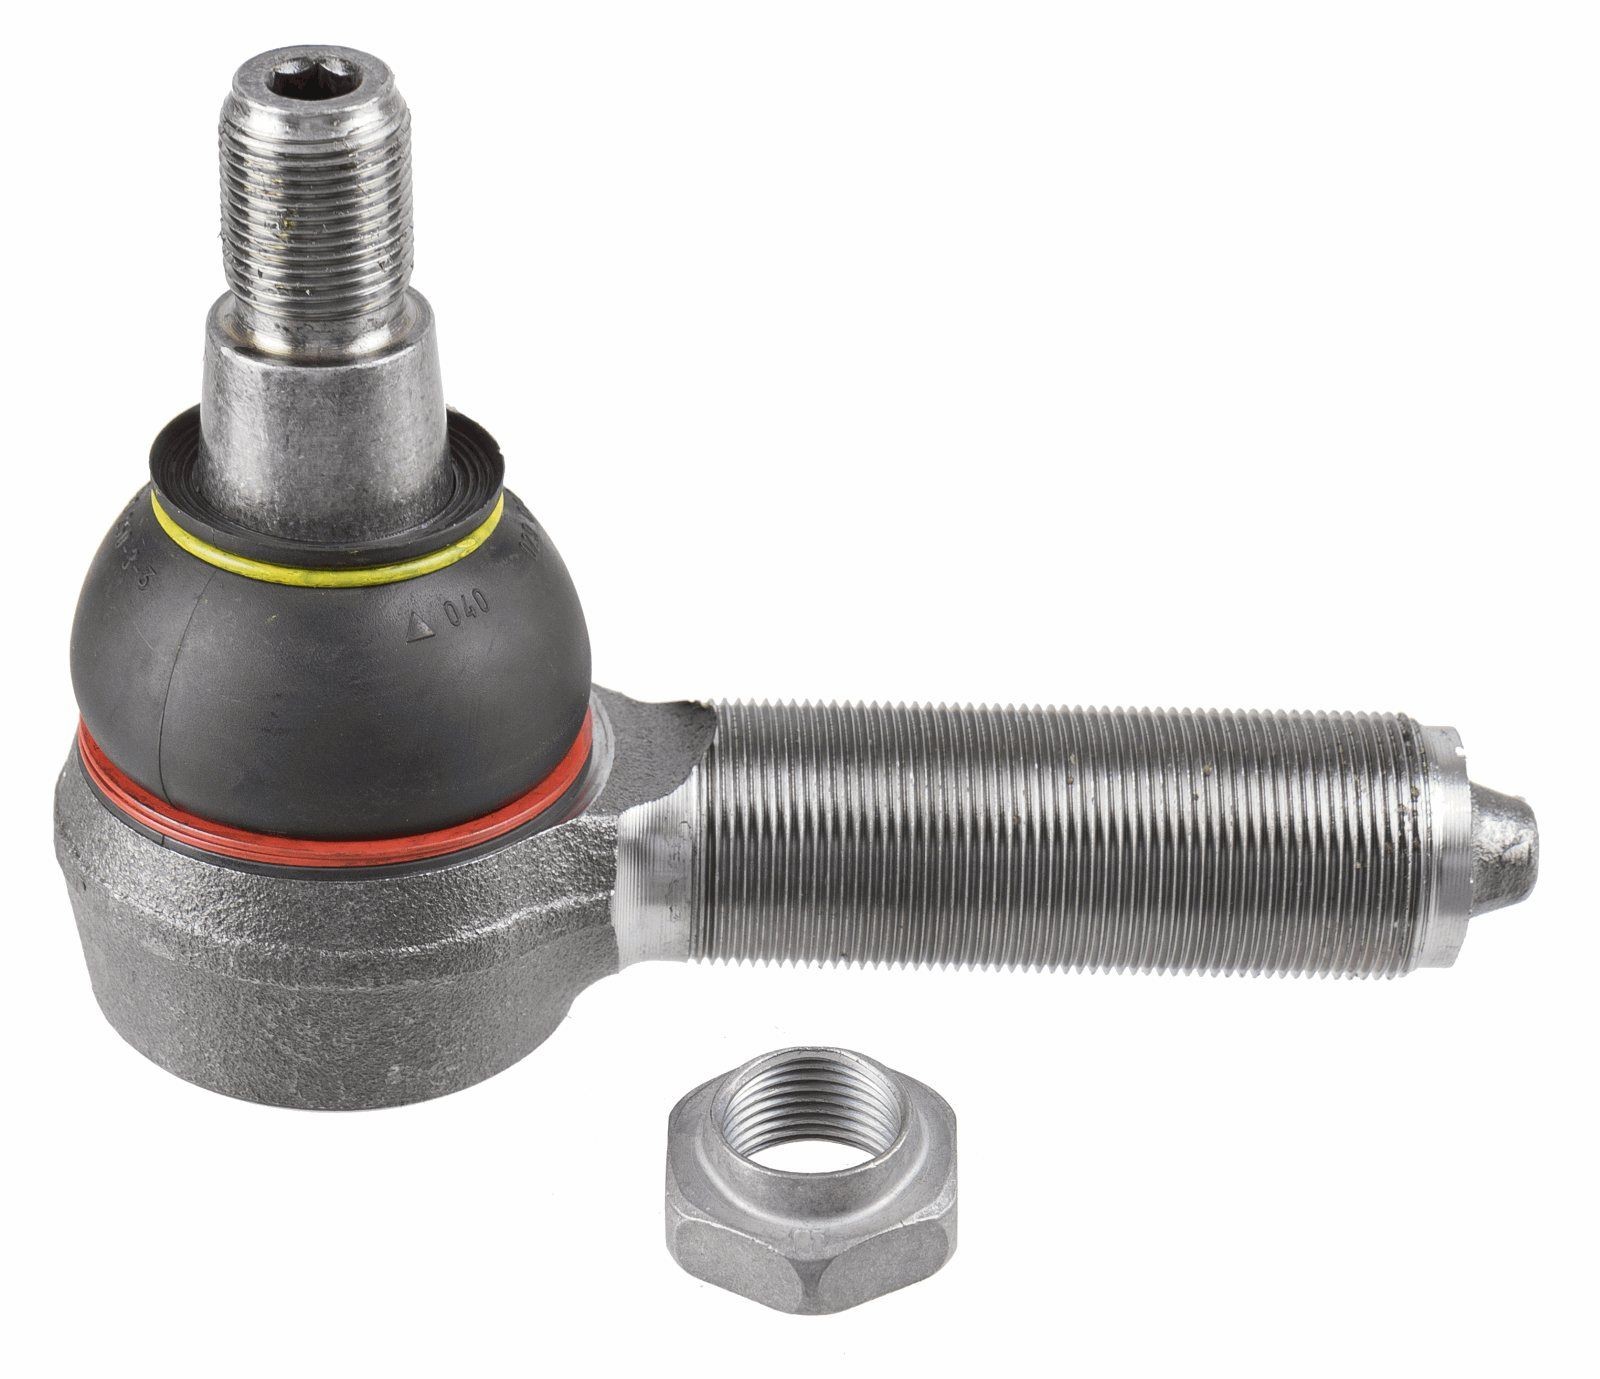 LEMFÖRDER Cone Size 28,6 mm, M30x1,5 mm, with accessories Cone Size: 28,6mm, Thread Type: with right-hand thread Tie rod end 11946 02 buy